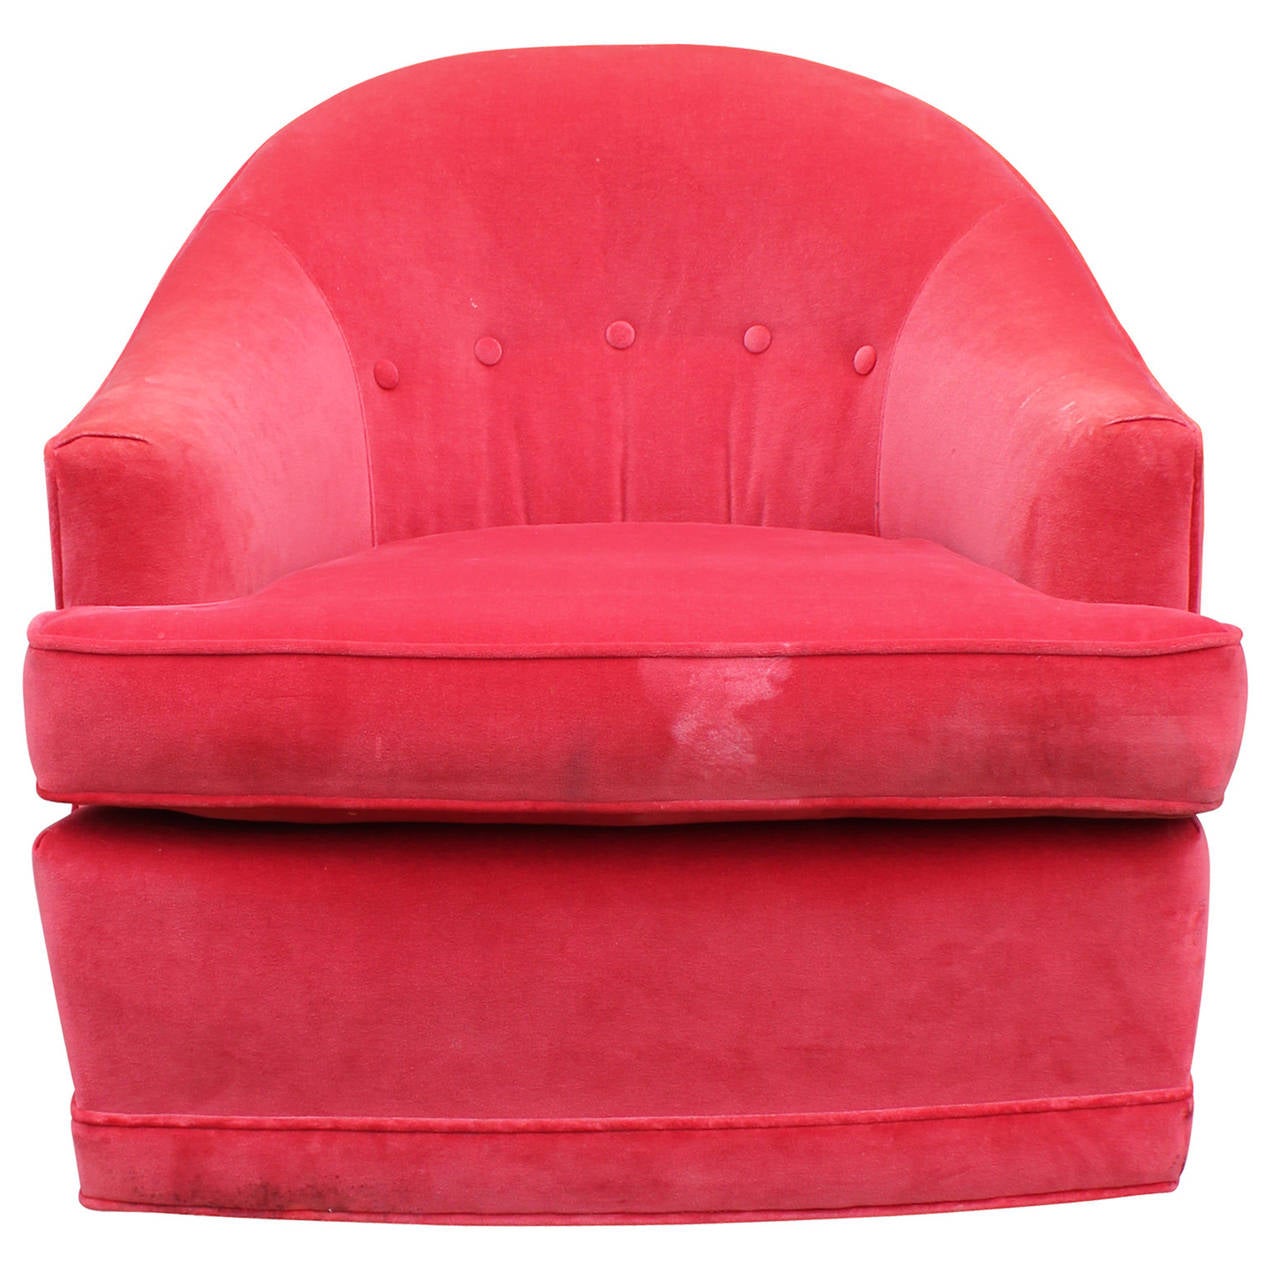 Fabulous pair of plush swivel chairs in the style of Milo Baughman. Chairs have soft curved lines and are tufted with five buttons. Chairs are currently upholstered in a worn red velvet but need reupholstery.

COM upholstery for an additional $1200